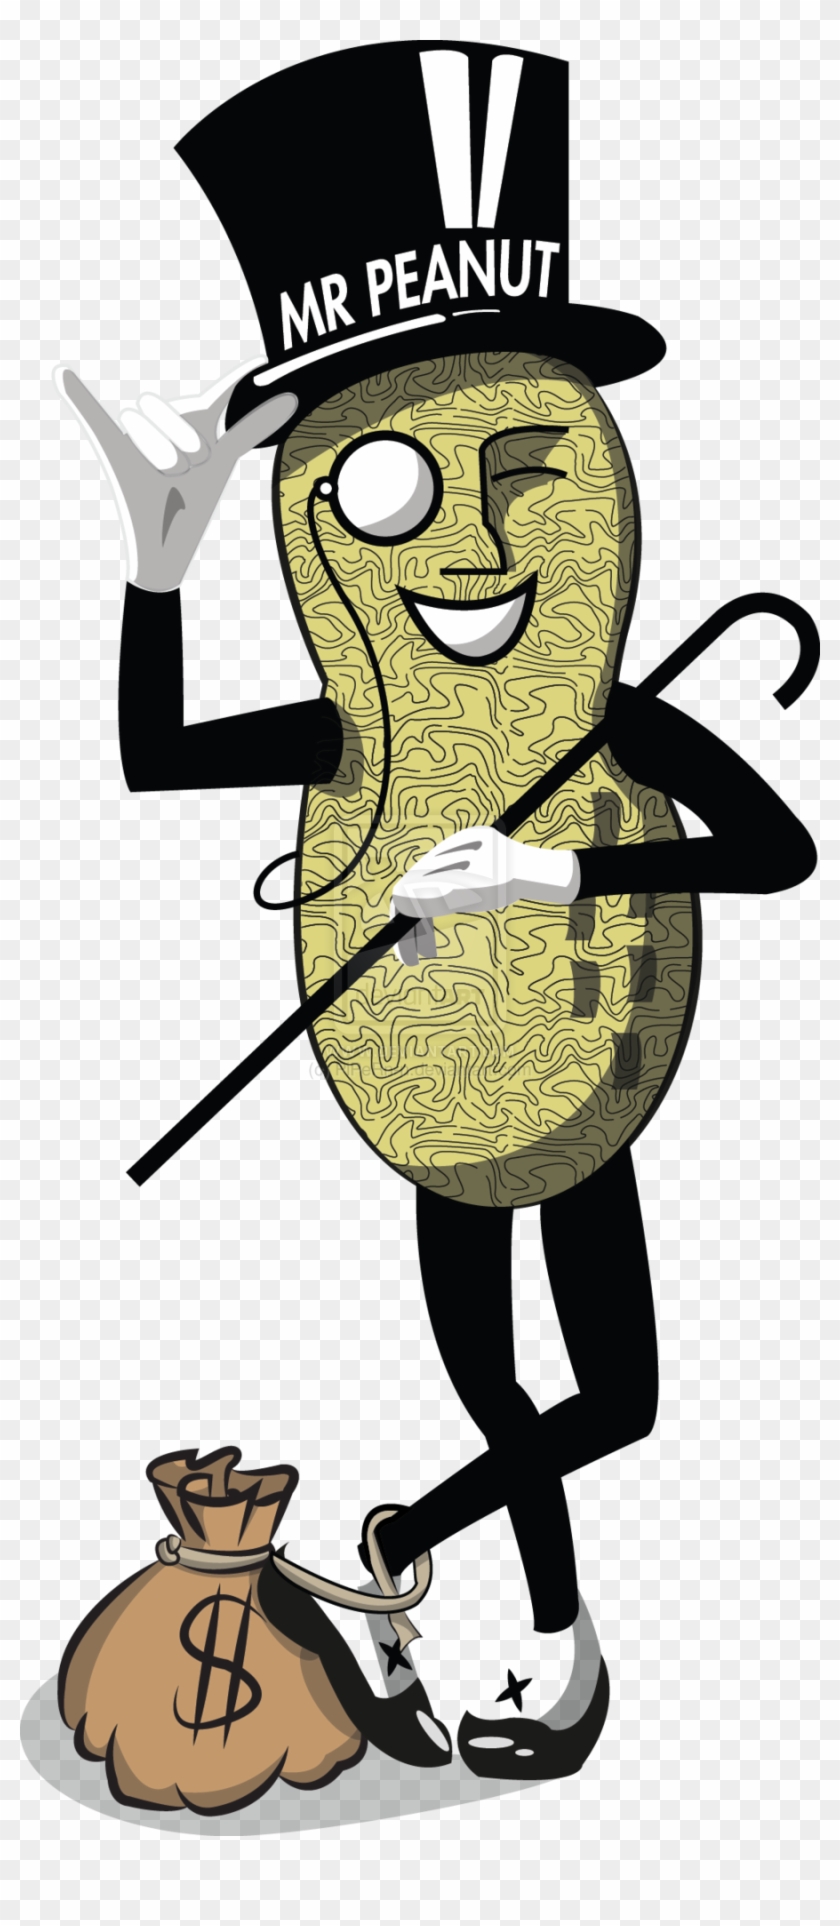 Download Free Printable Clipart And Coloring Pages - Mr Peanut #1119392